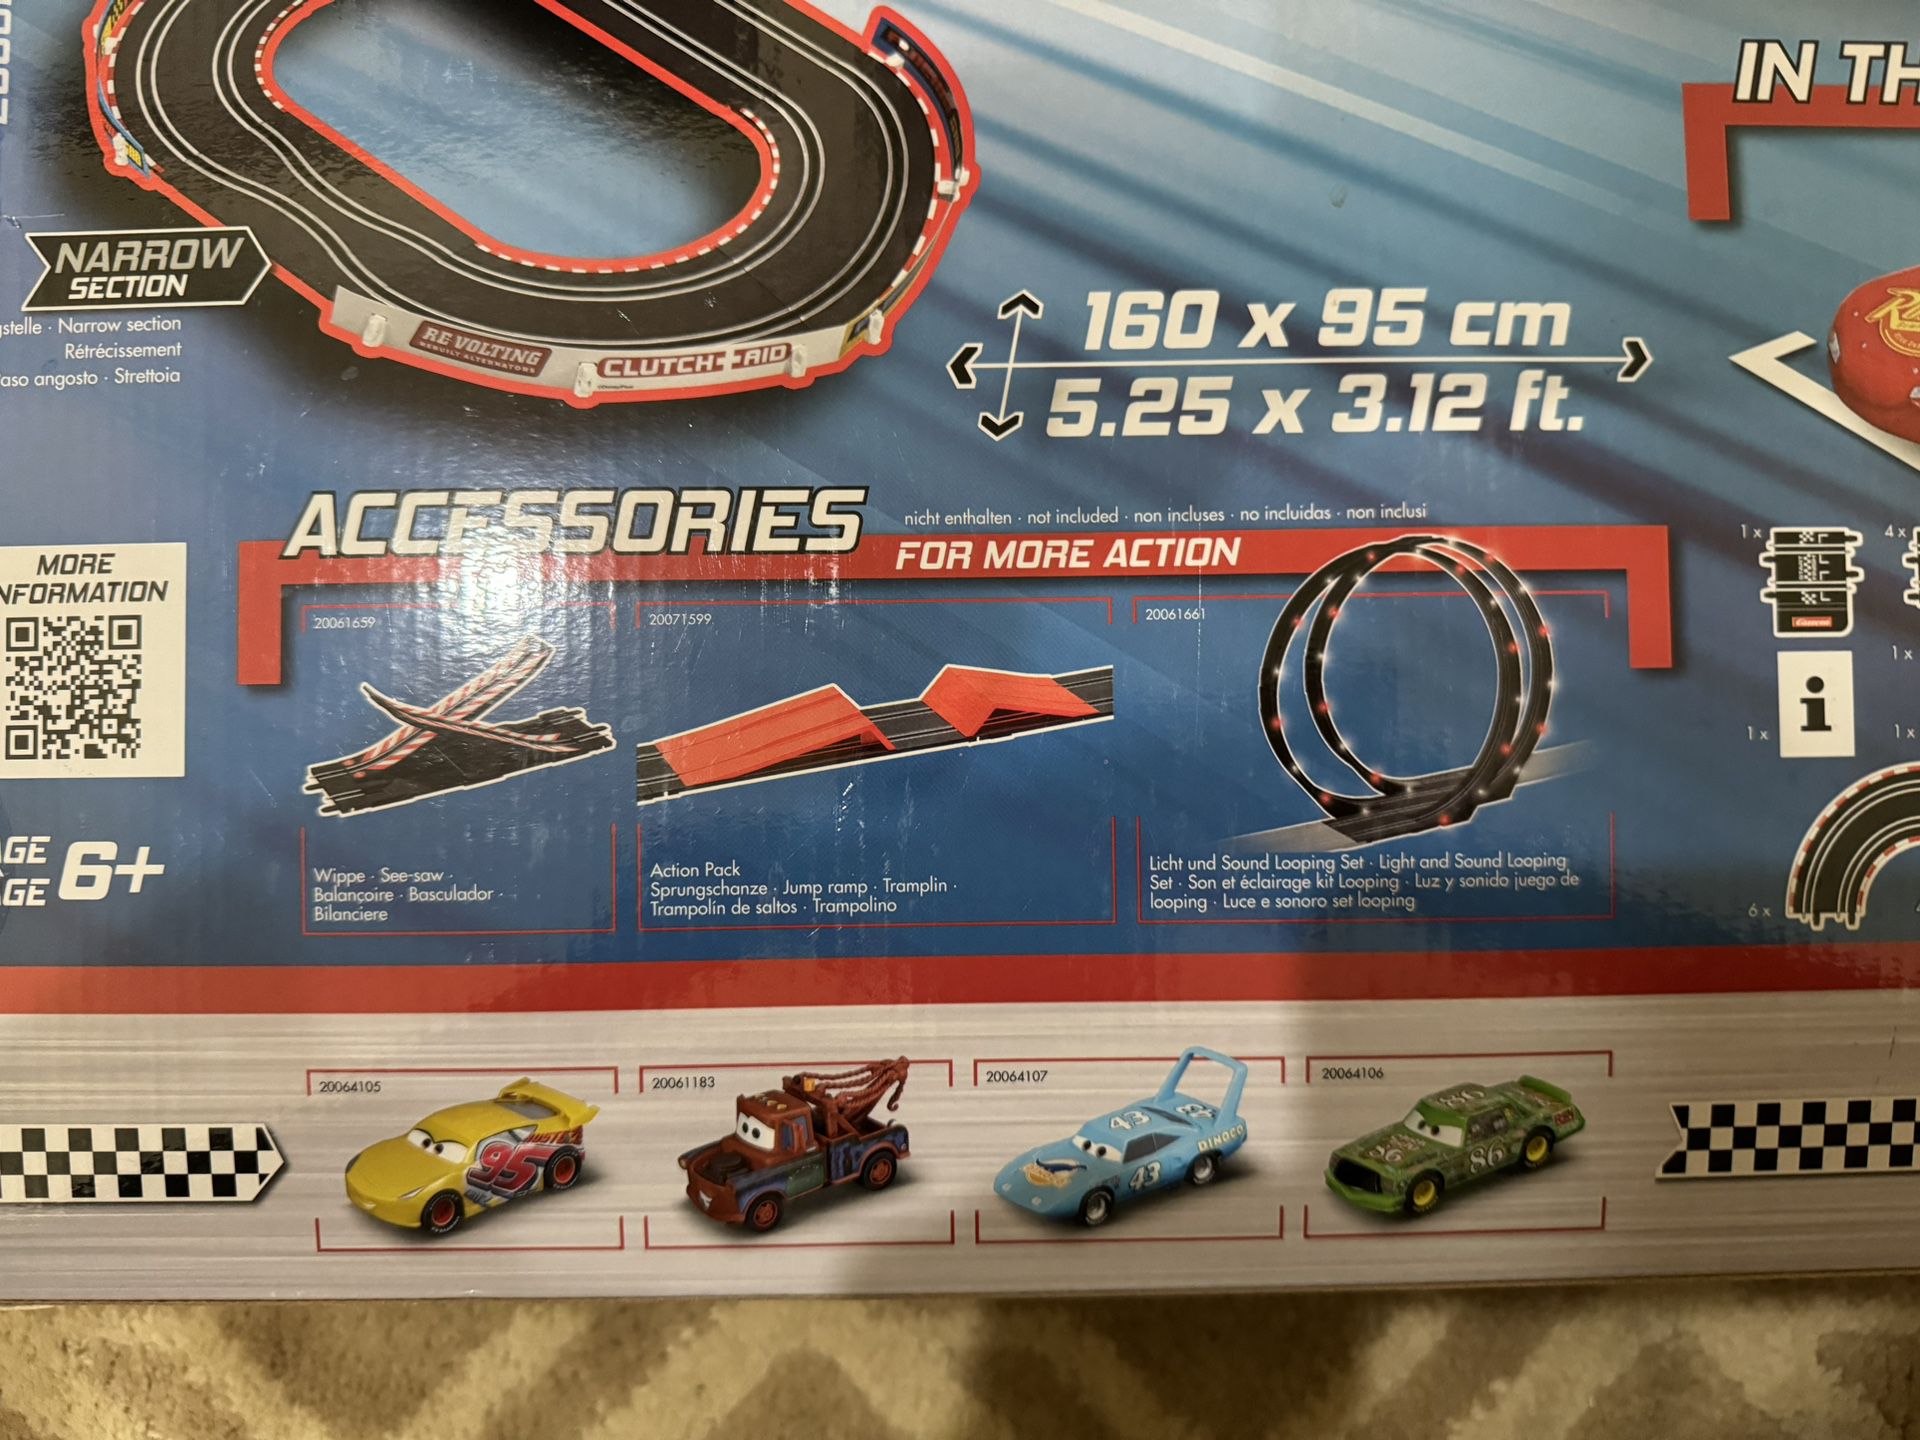 Carrera GO!!! 62477 Disney Pixar Cars Neon Nights Electric Slot Car Racing  Kids Toy Race Track Set Includes 2 Controllers and 2 Cars in 1:43 Scale